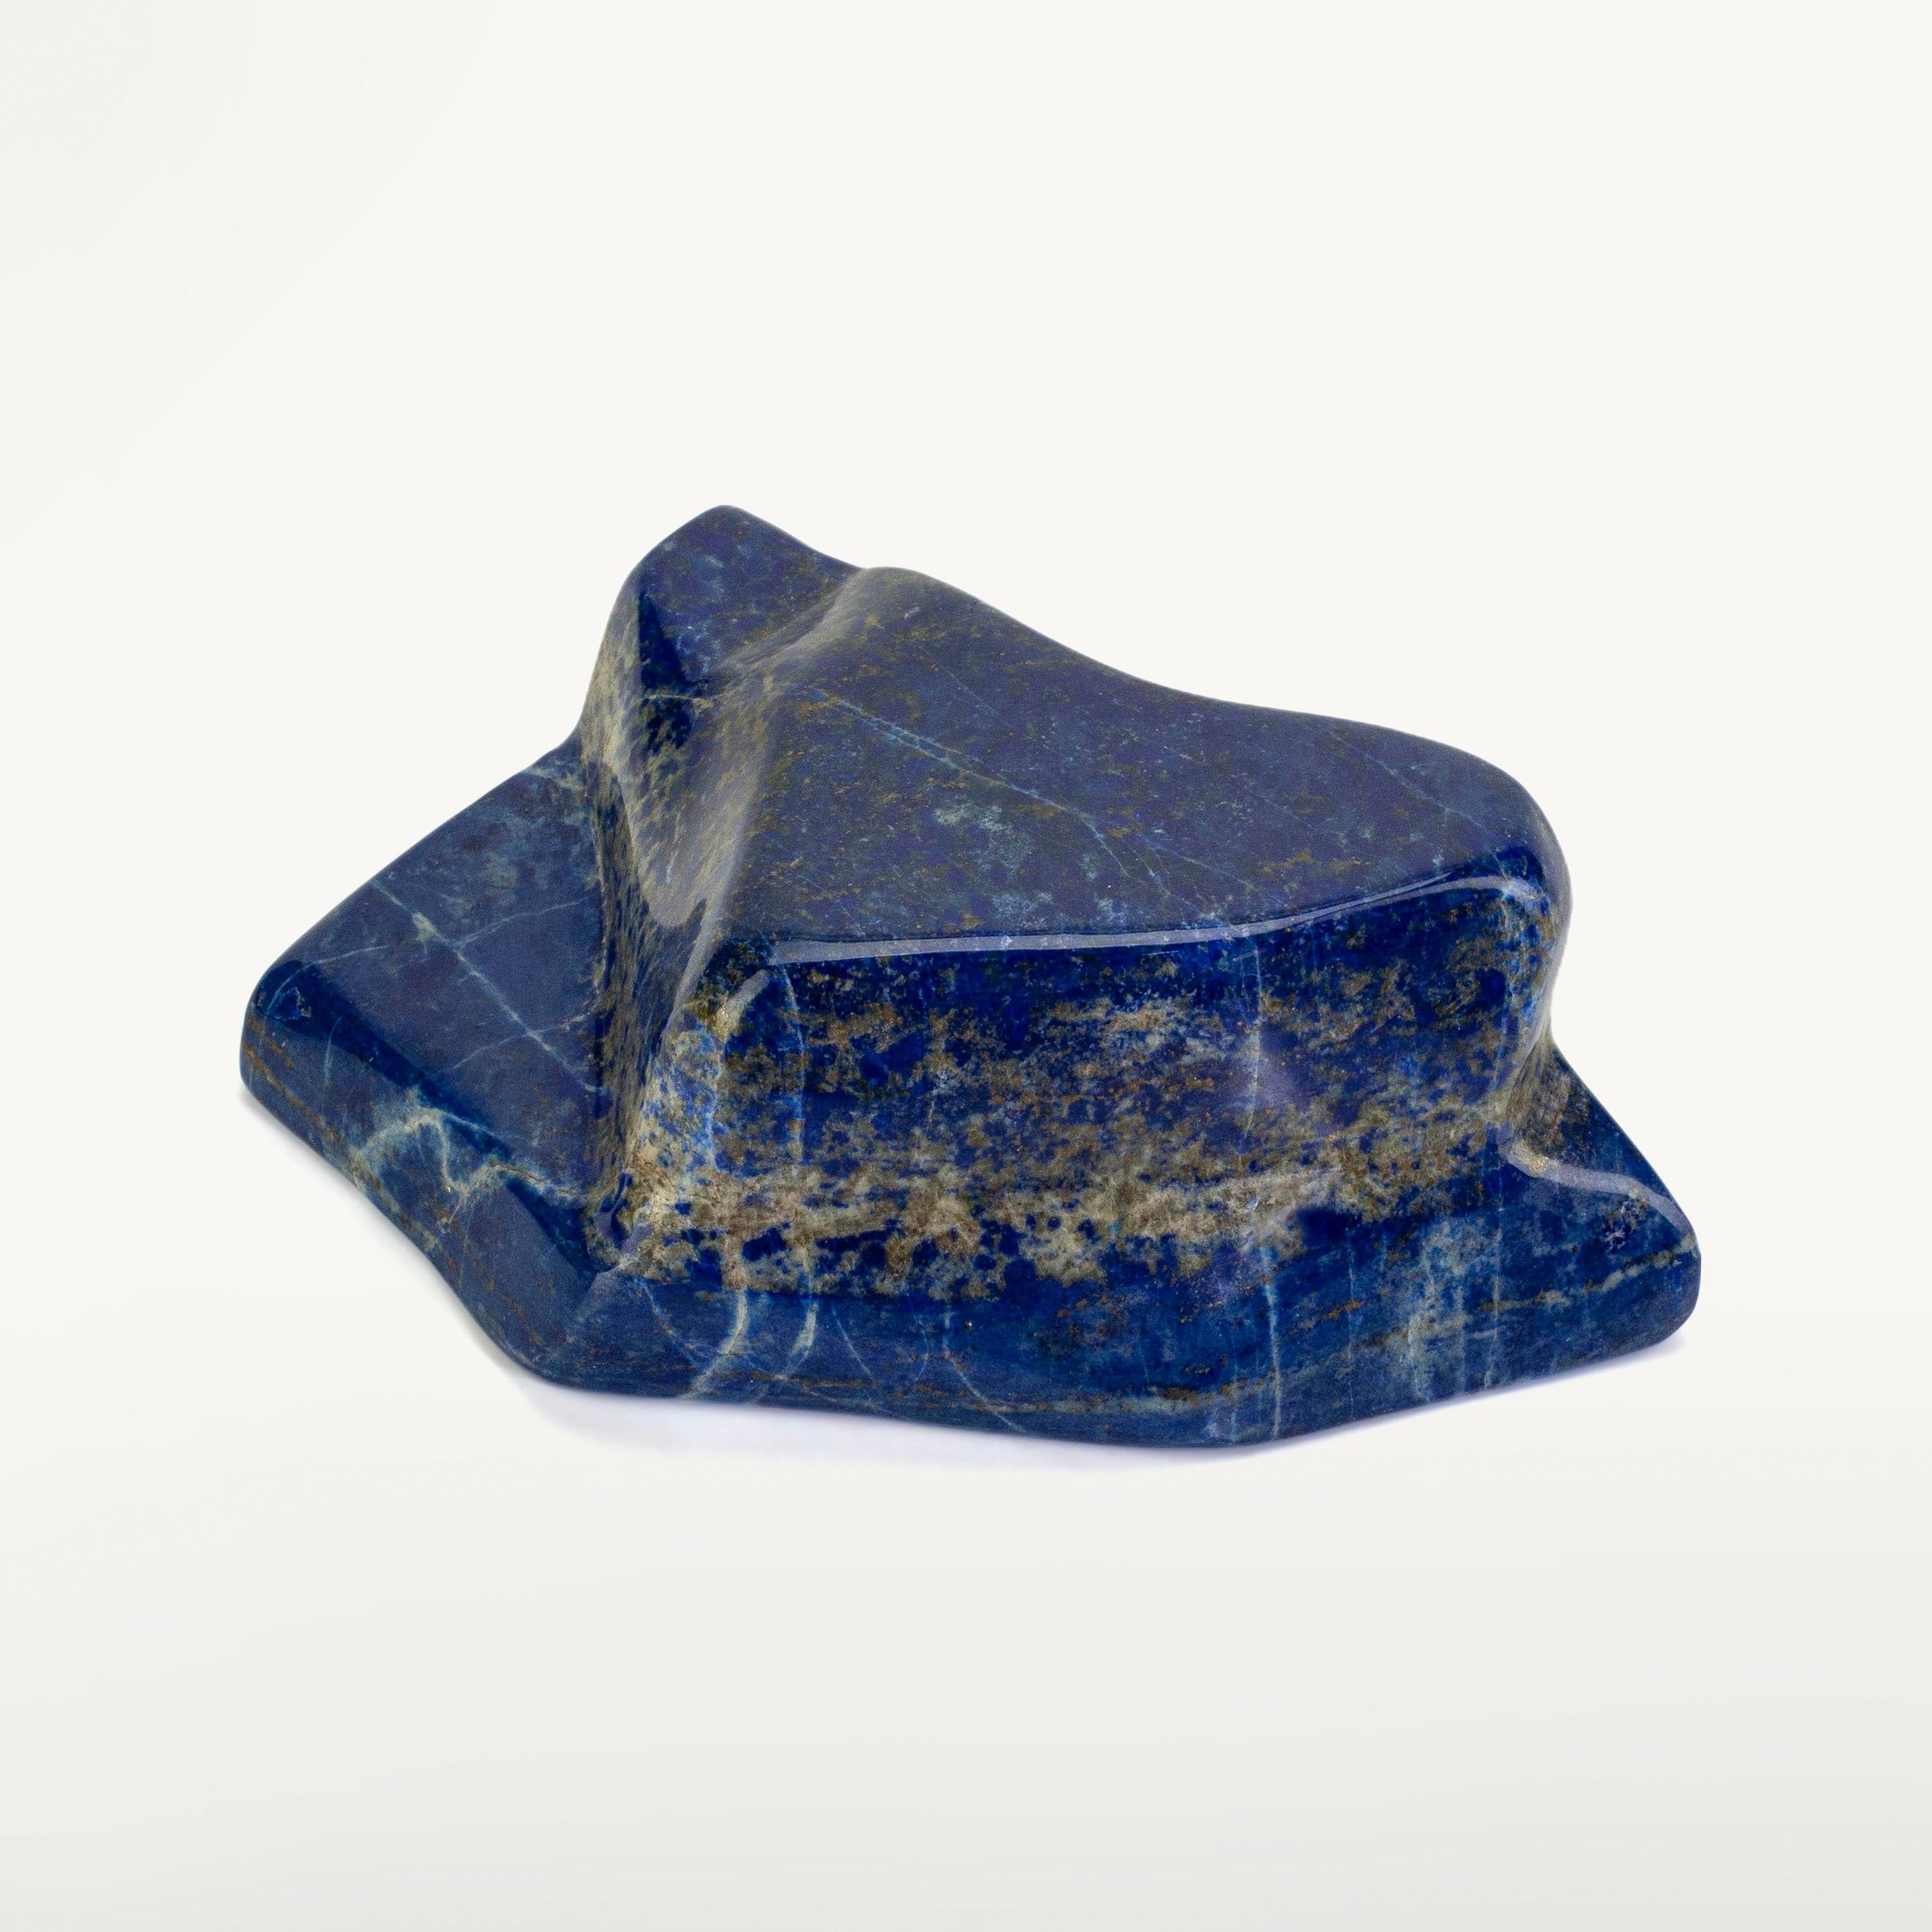 Kalifano Lapis Lapis Lazuil Freeform from Afghanistan - 1.7 kg / 3.8 lbs LP1800.001